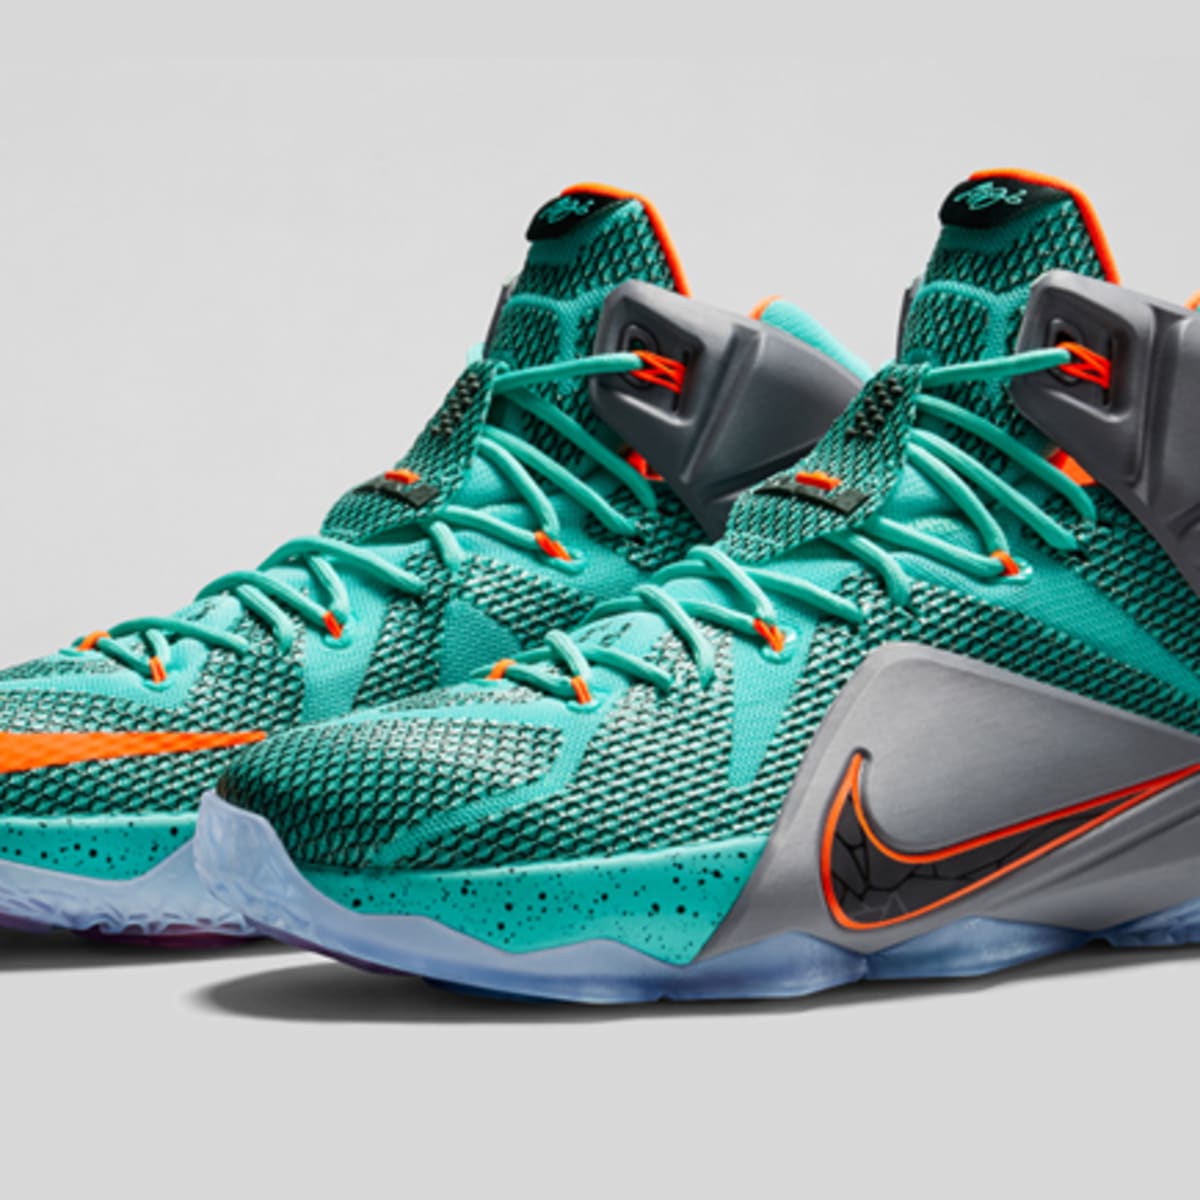 lebron james shoes series,Save up to